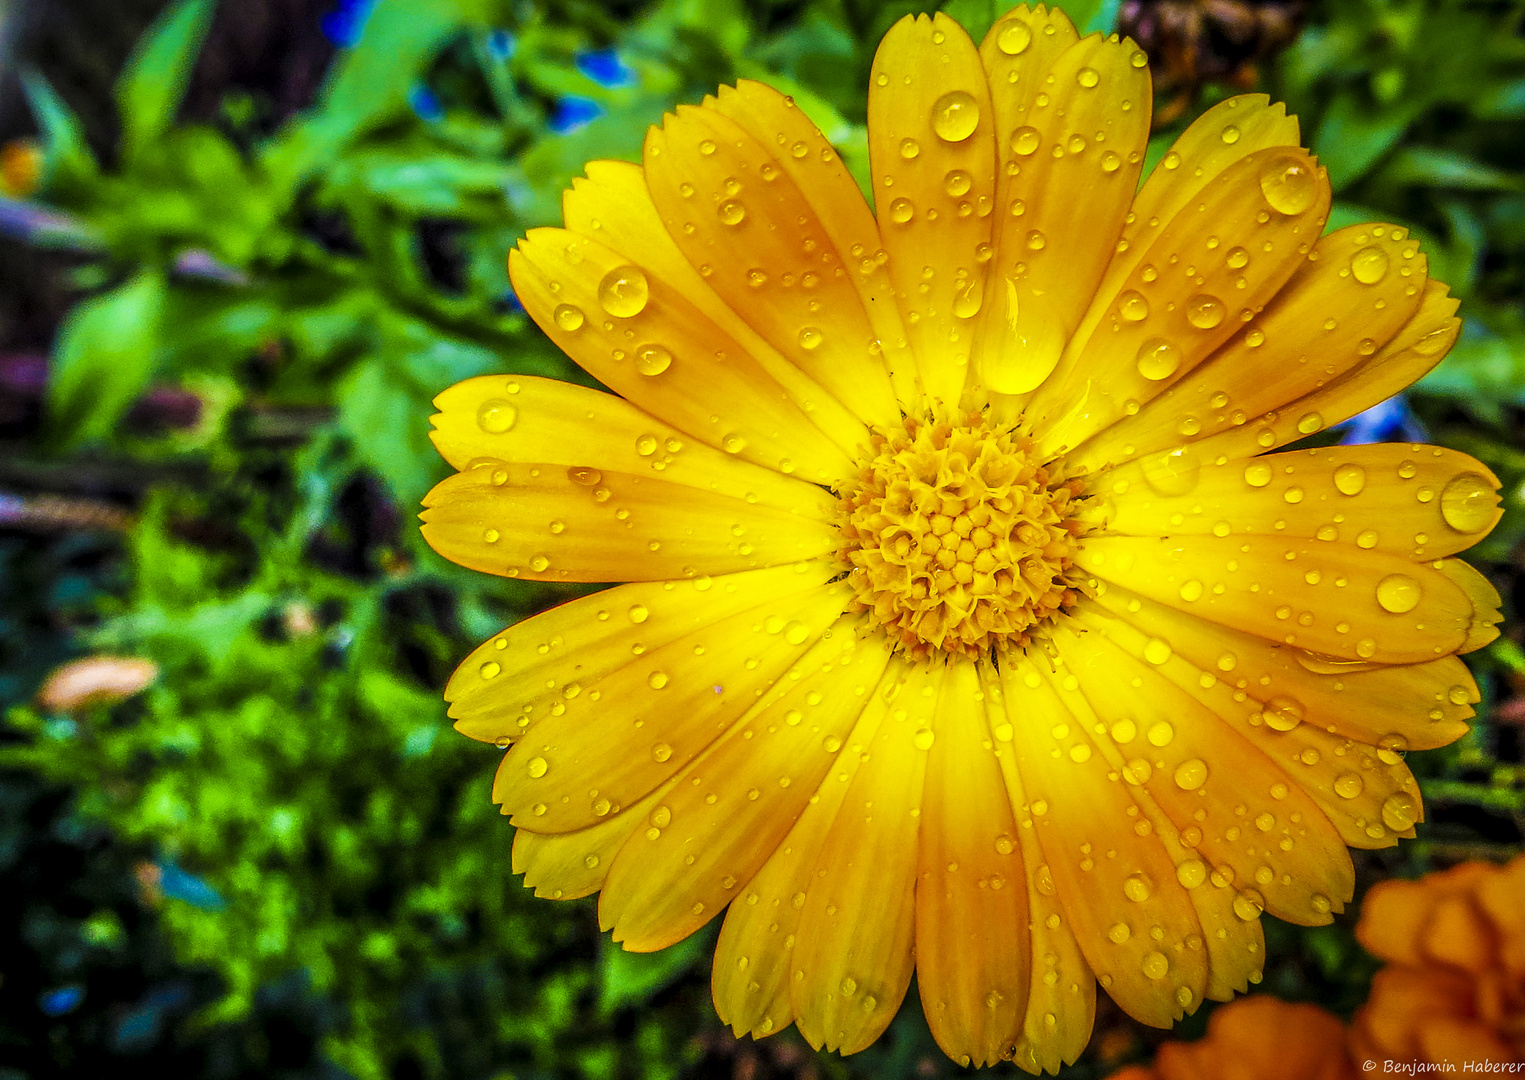 Raindrops on the yellow flower